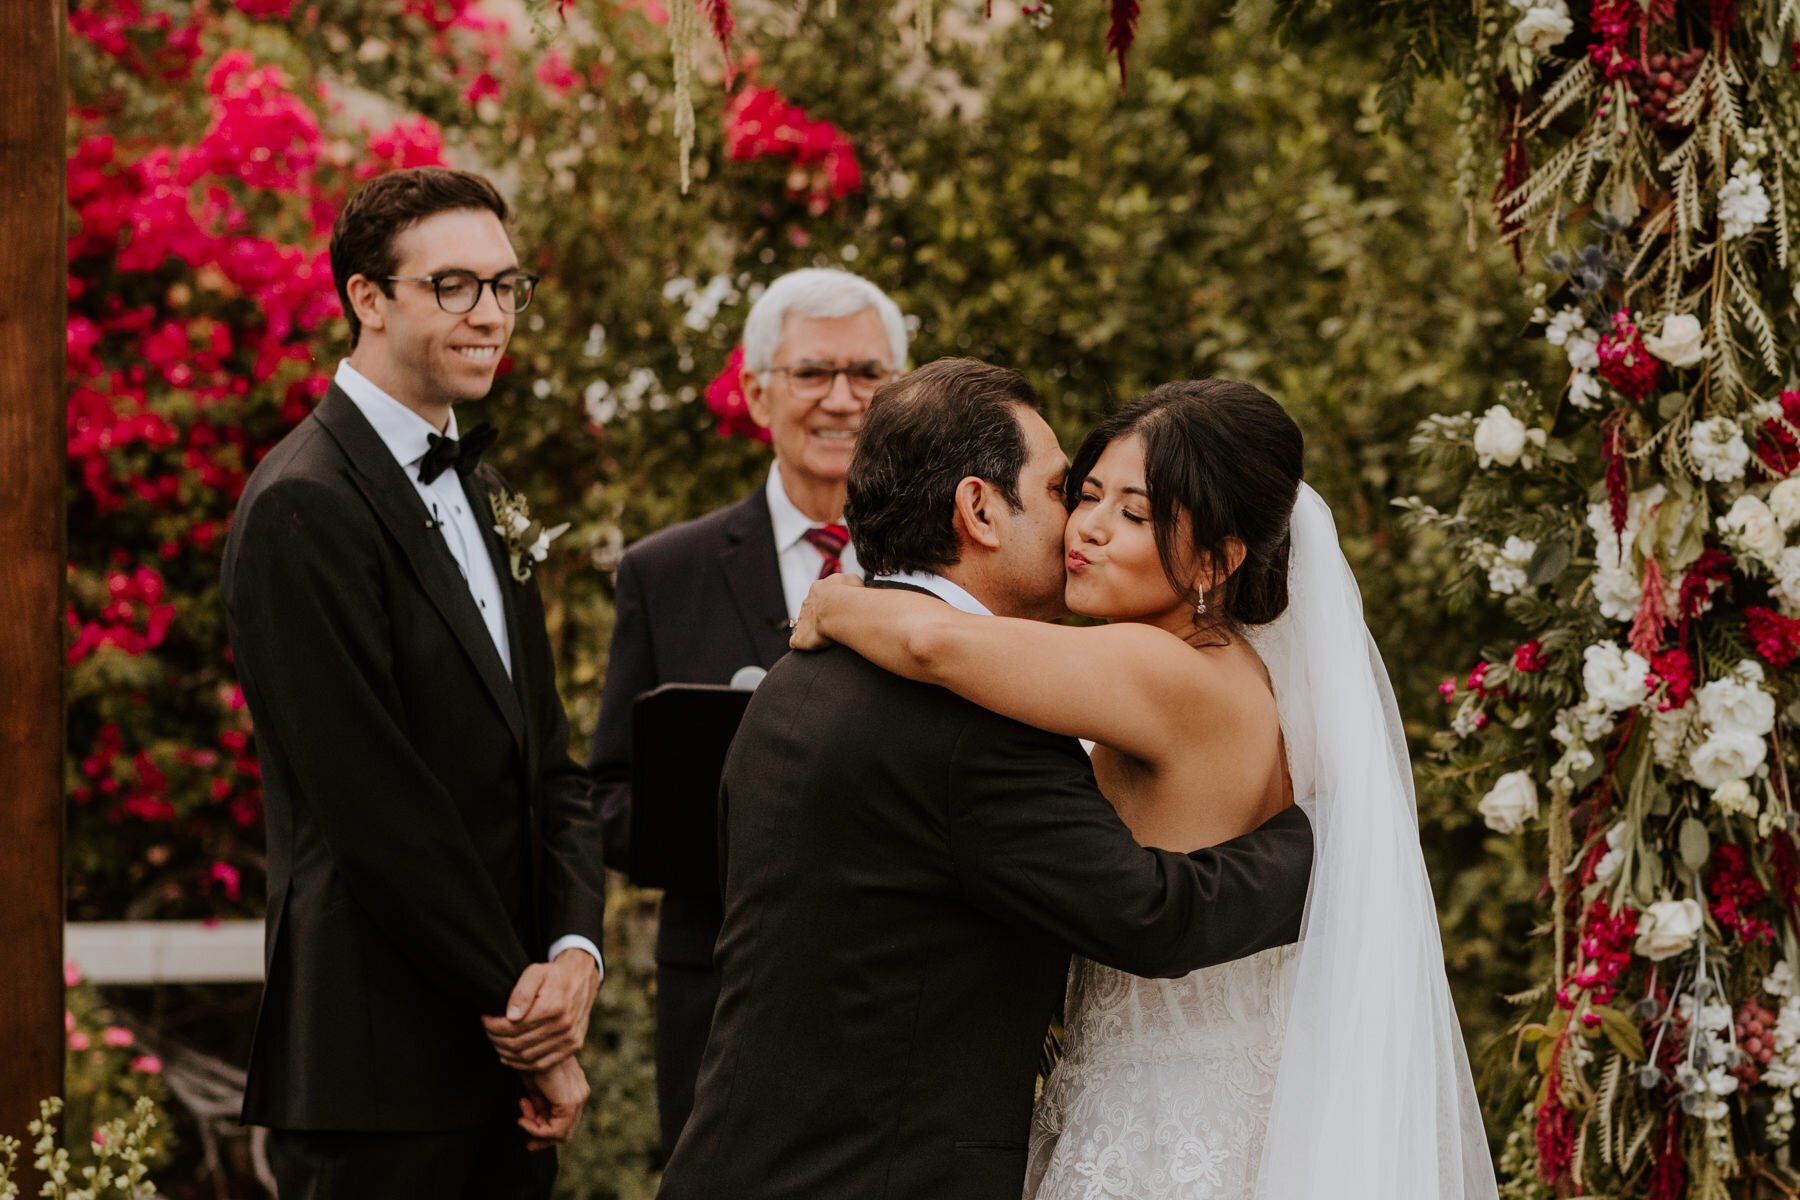 Father of the Bride hugging Bride at the end of the aisle, Spencer’s Restaurant Palm Springs Wedding, Palm Springs Wedding Photographer | Tida Svy Photo